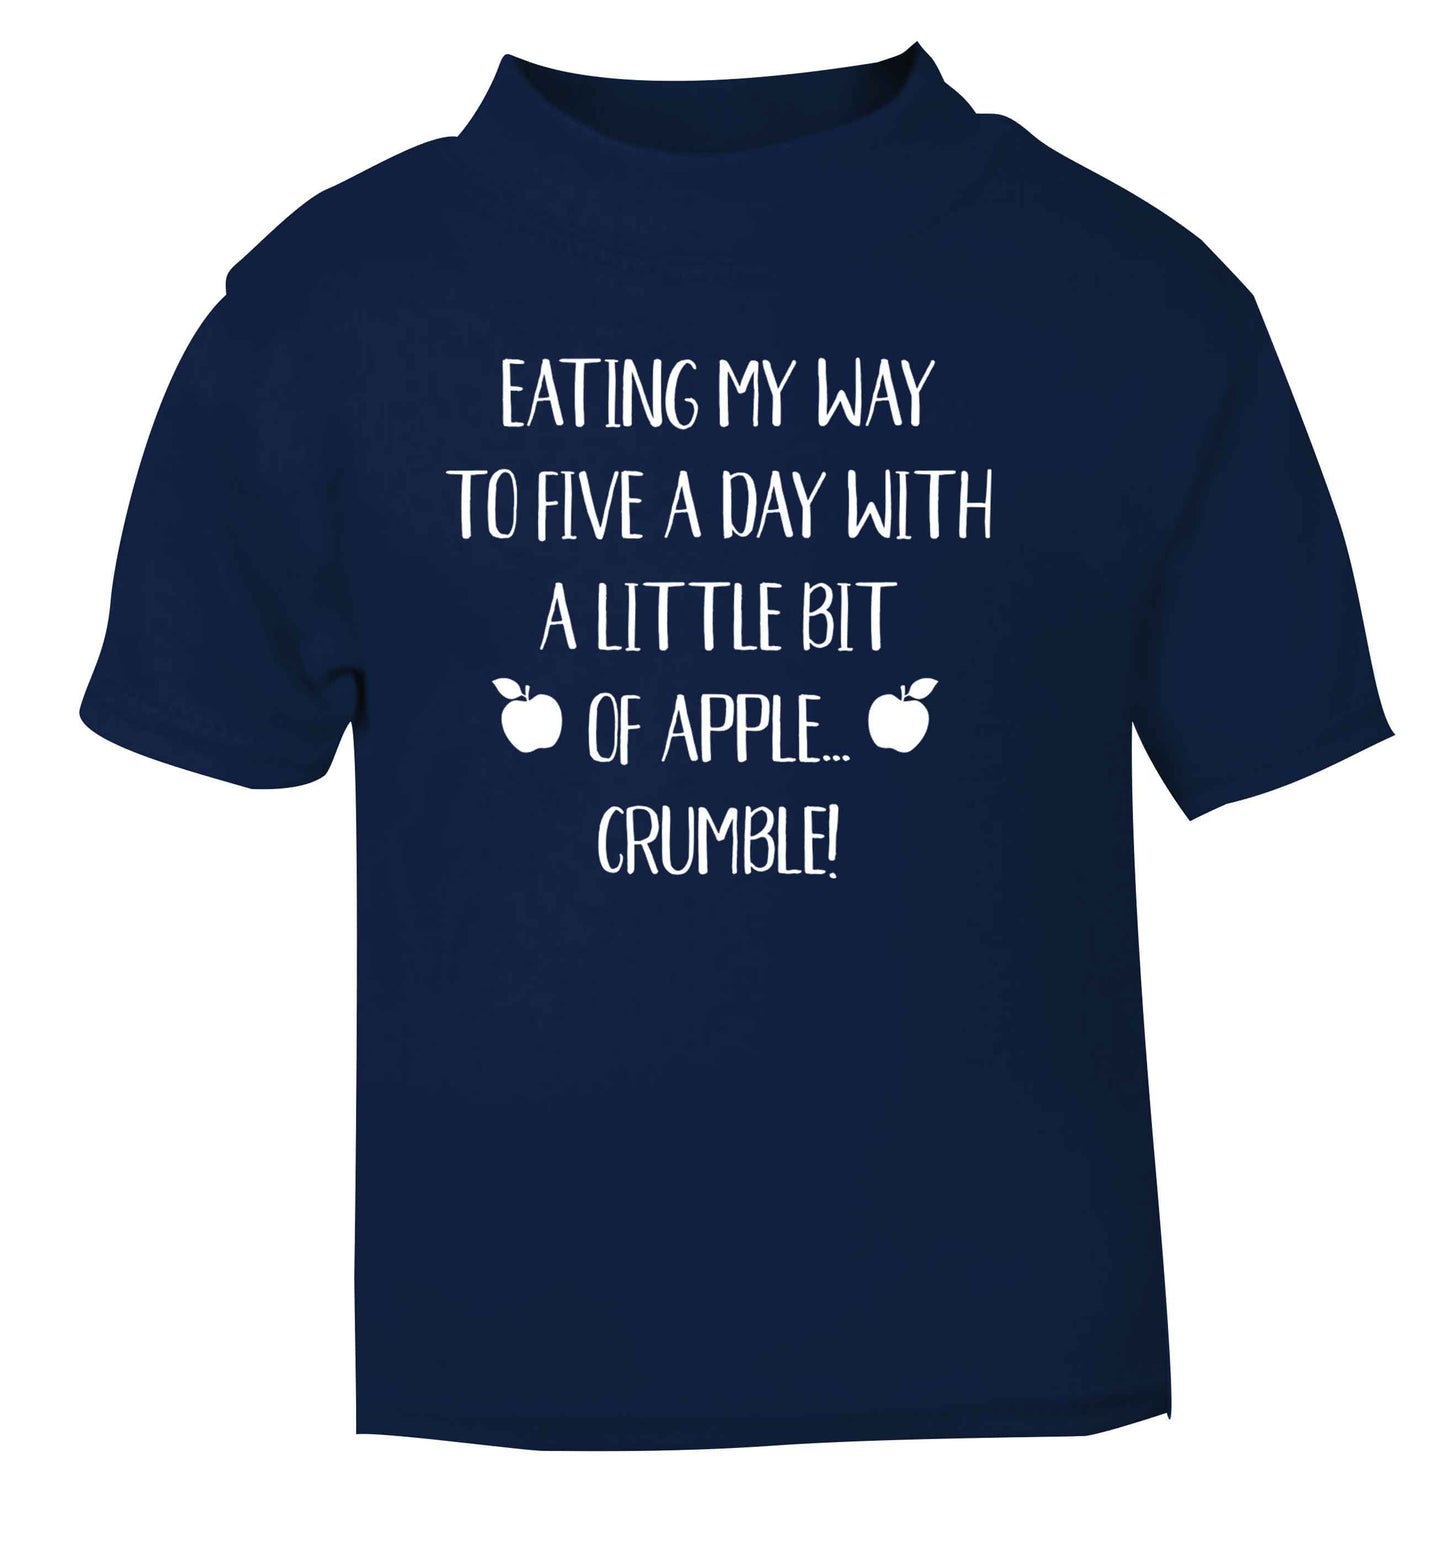 Eating my way to five a day with a little bit of apple crumble navy Baby Toddler Tshirt 2 Years